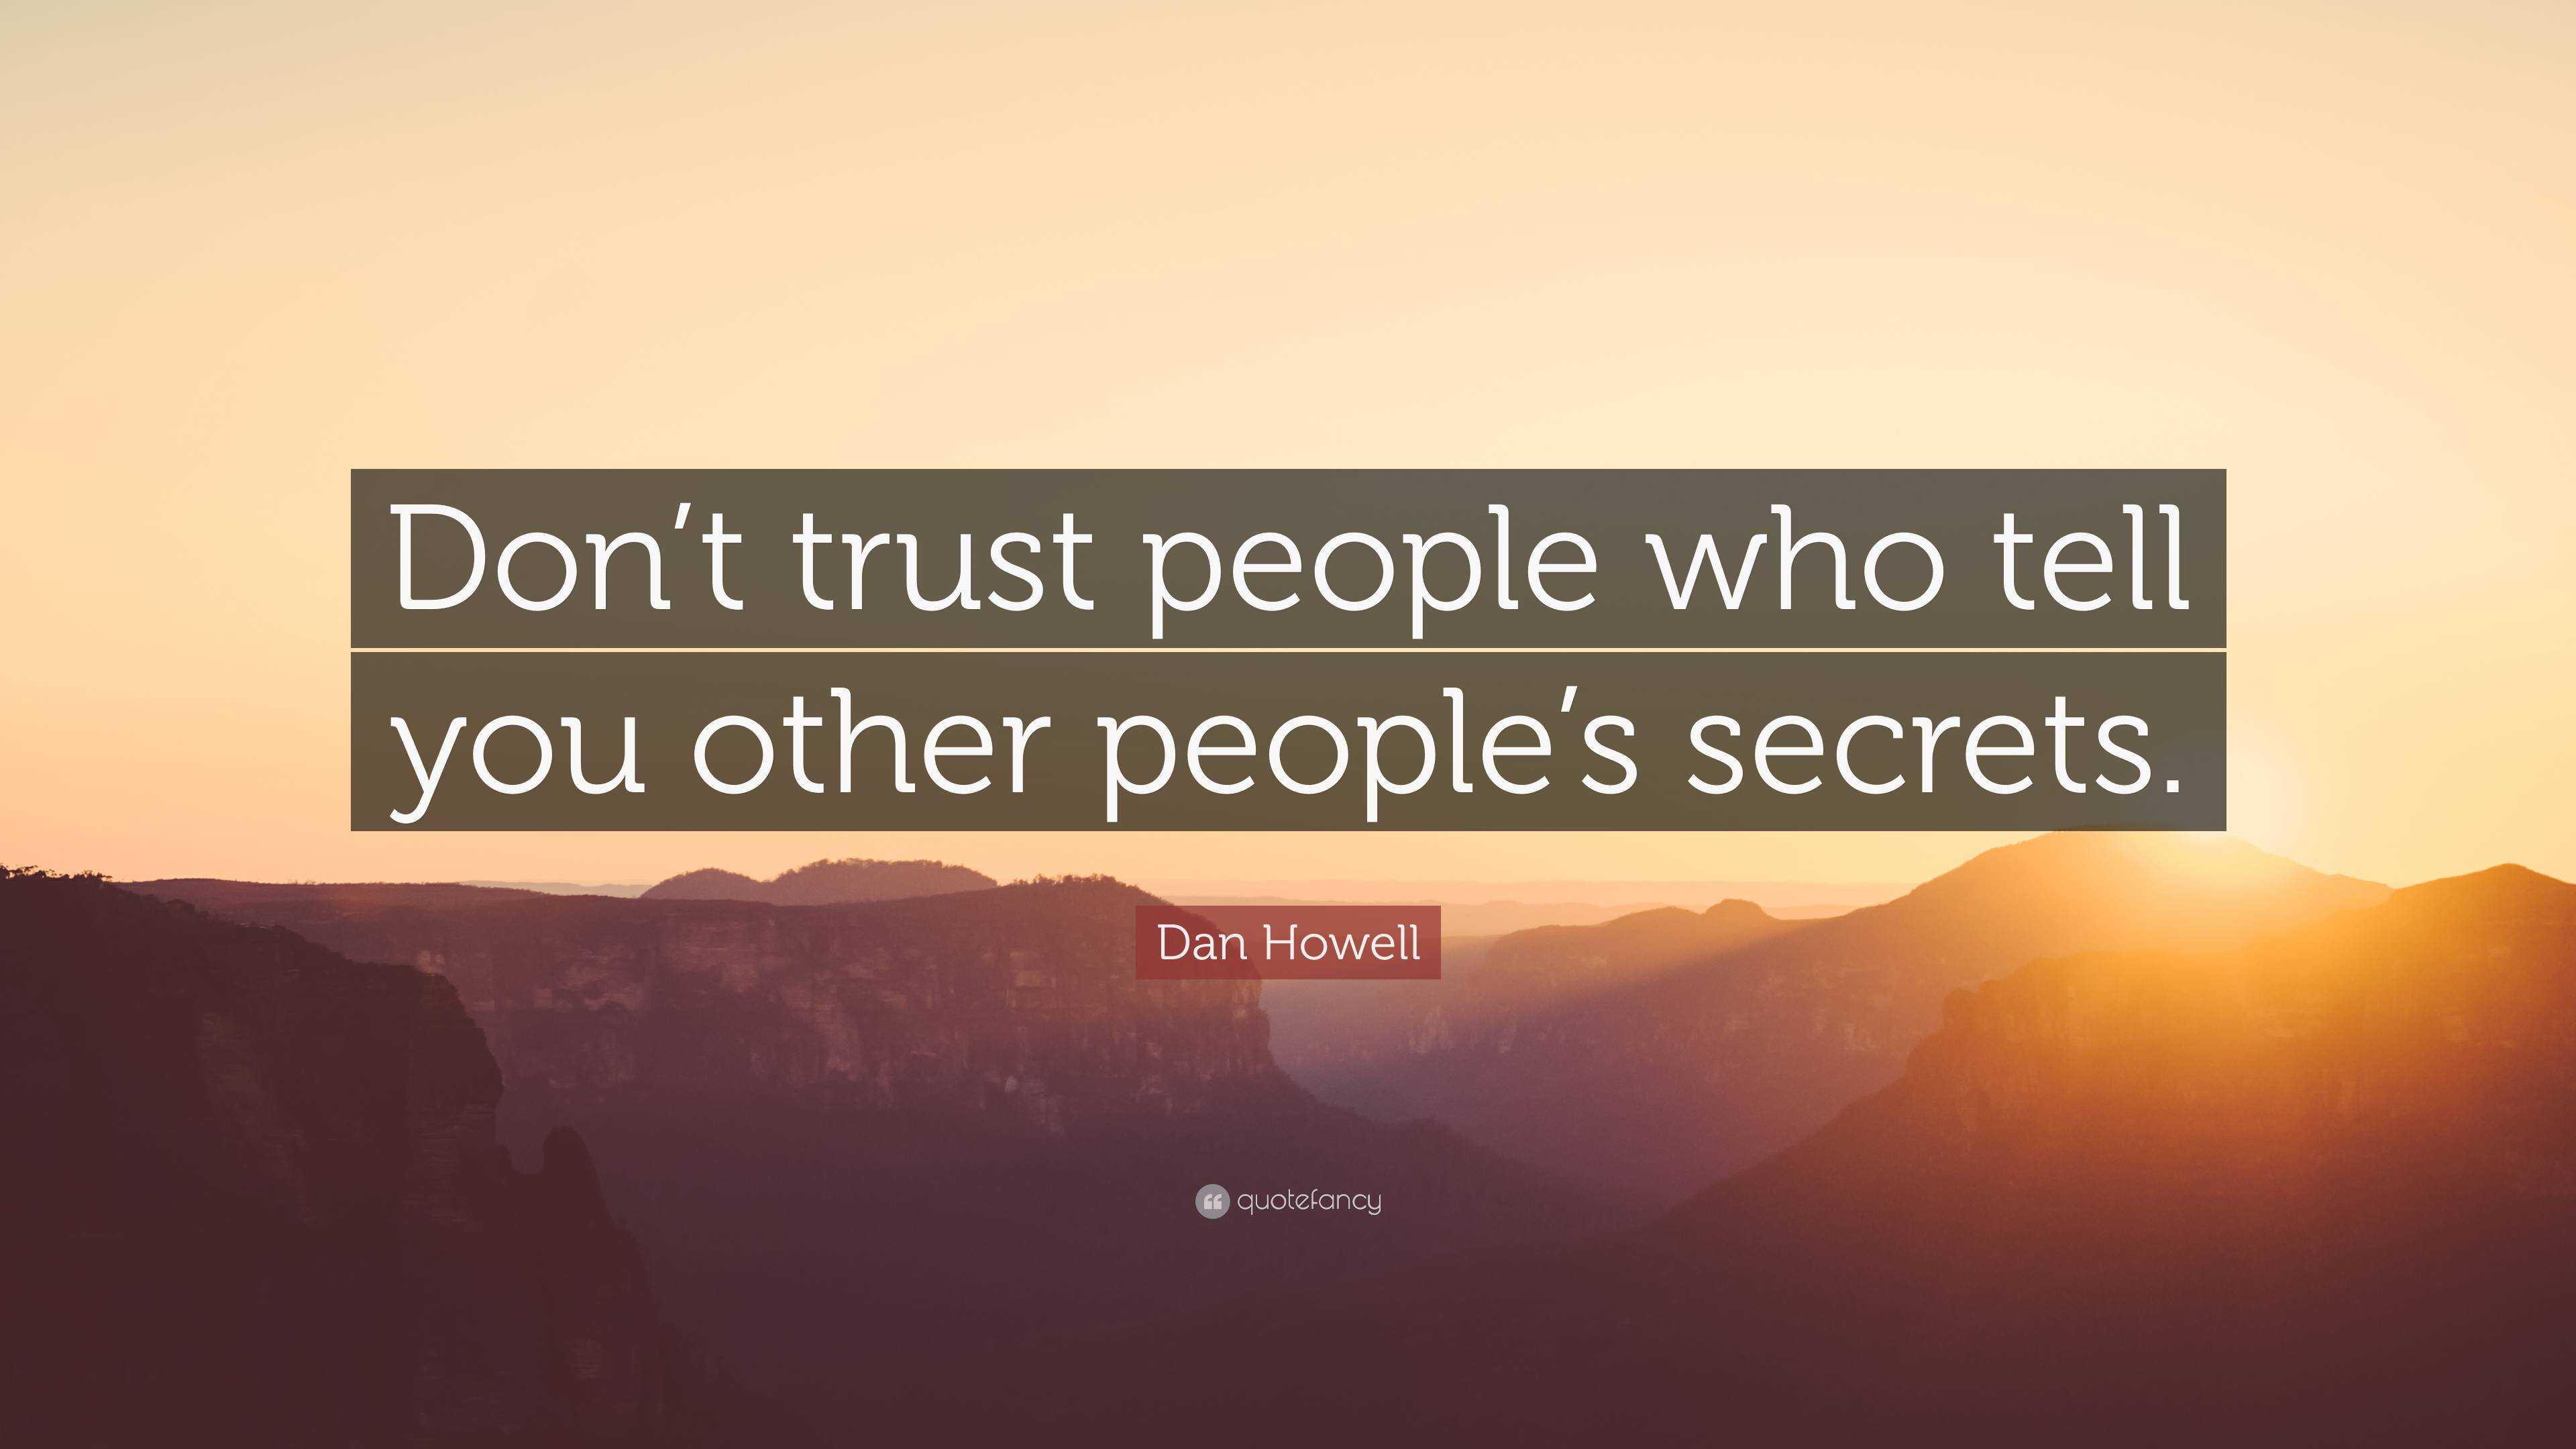 Dan Howell Quote: “Don’t trust people who tell you other people’s secrets.”